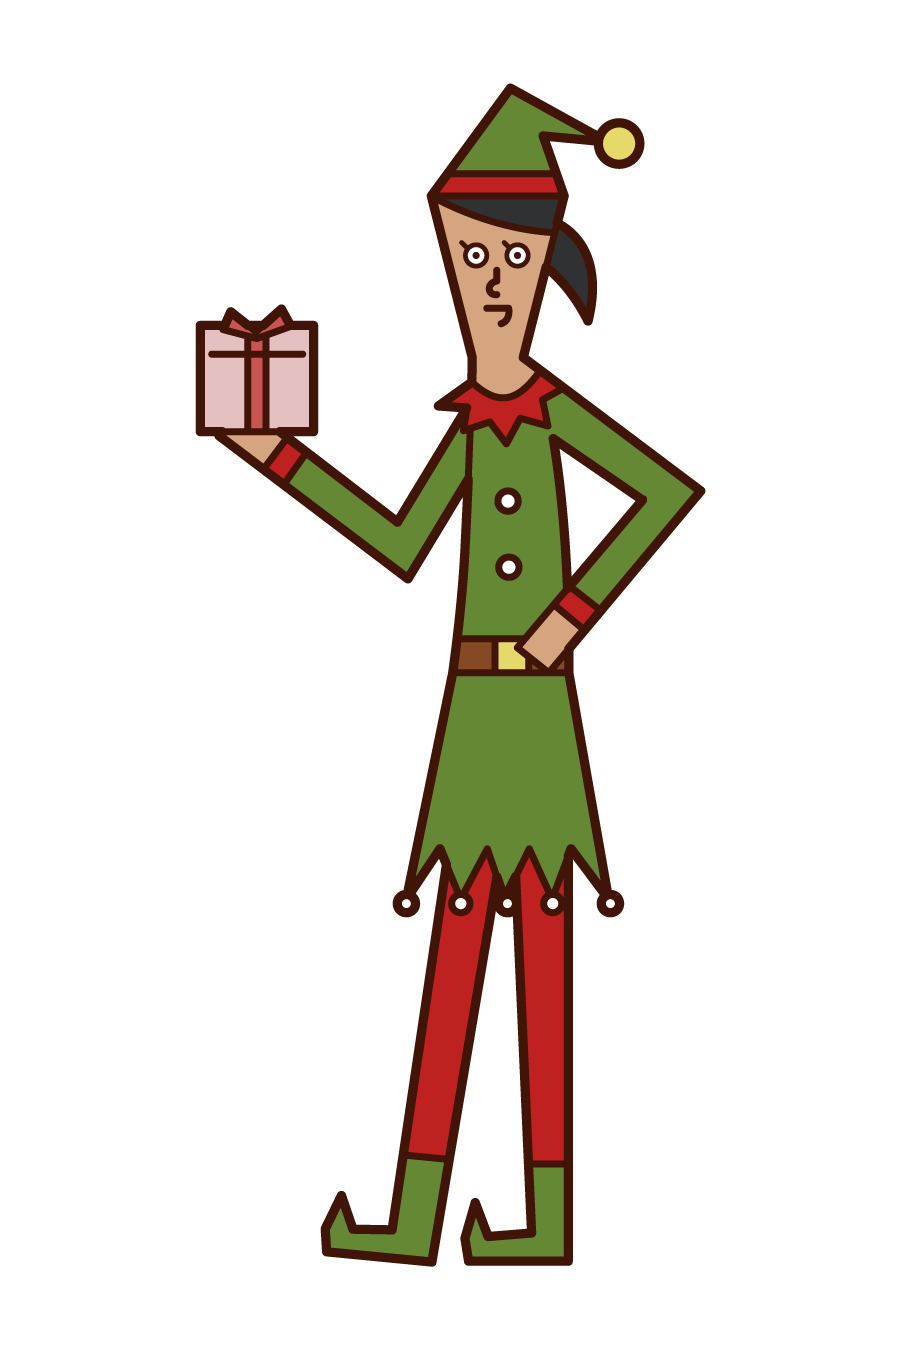 Illustration of a woman in a Christmas elf costume